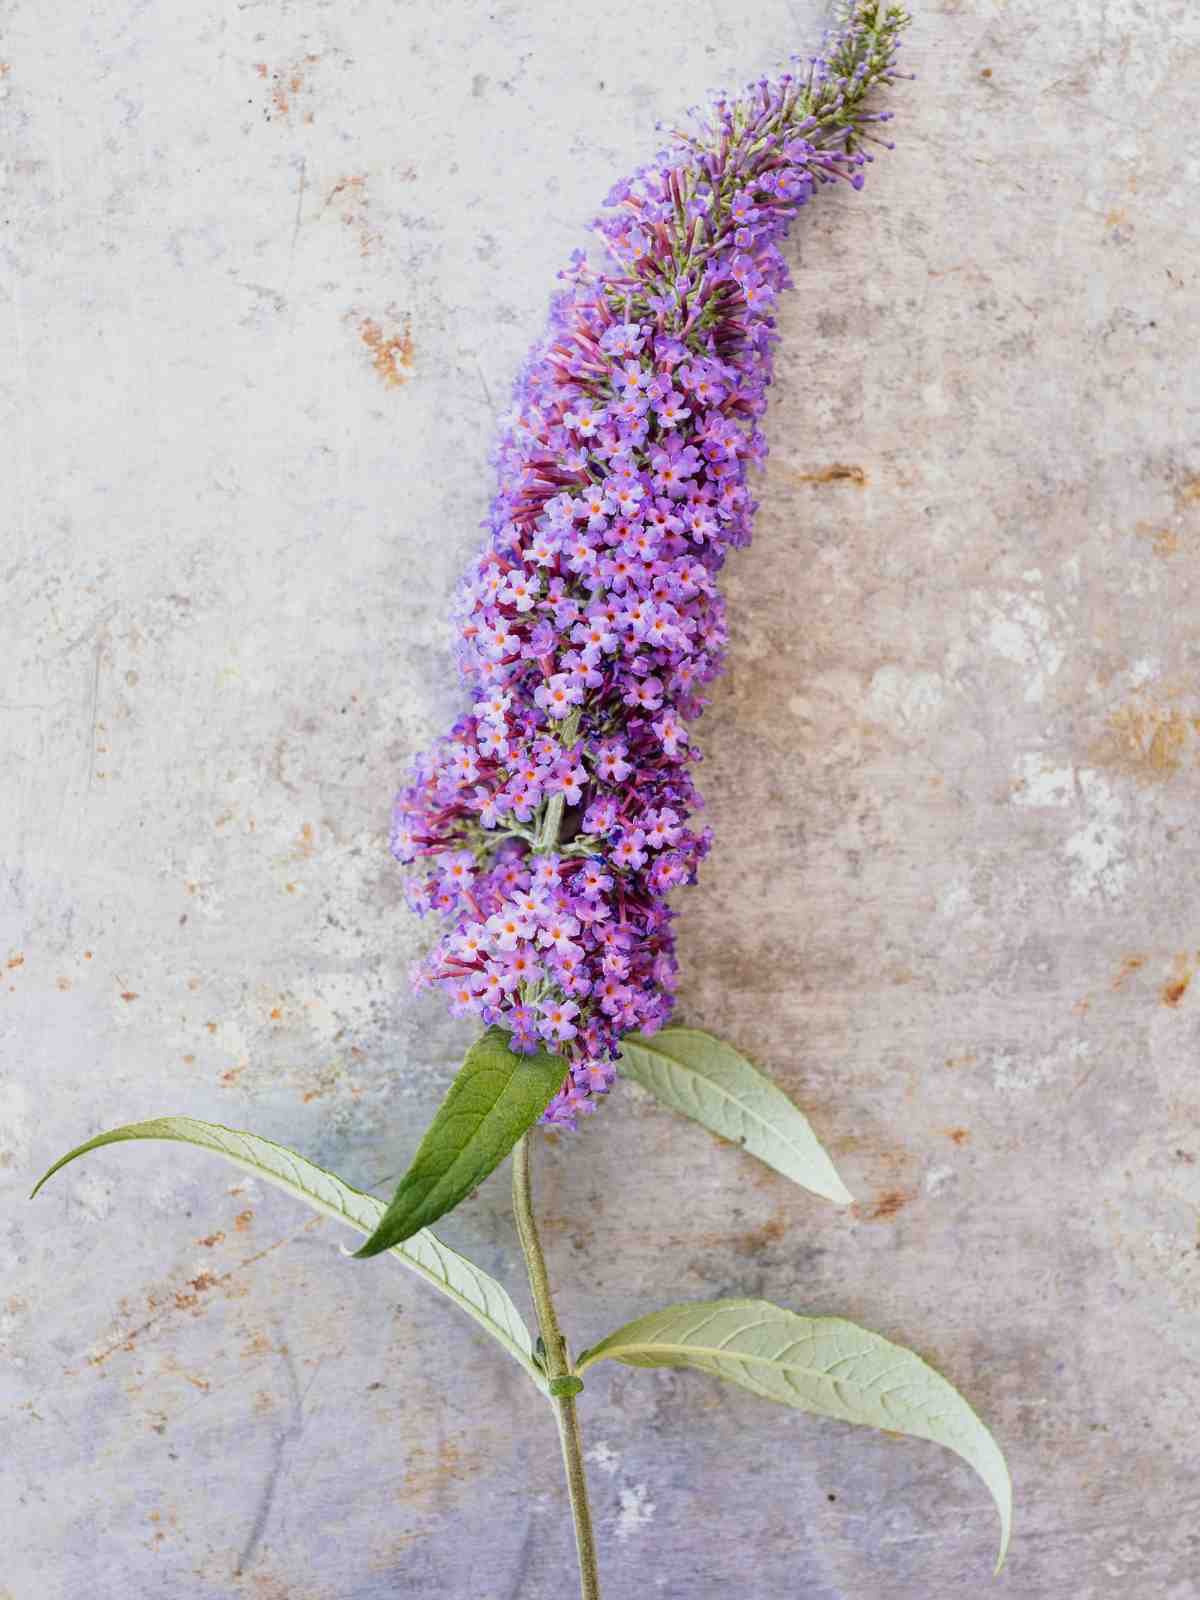 How To Care For A Butterfly Bush: A Guide